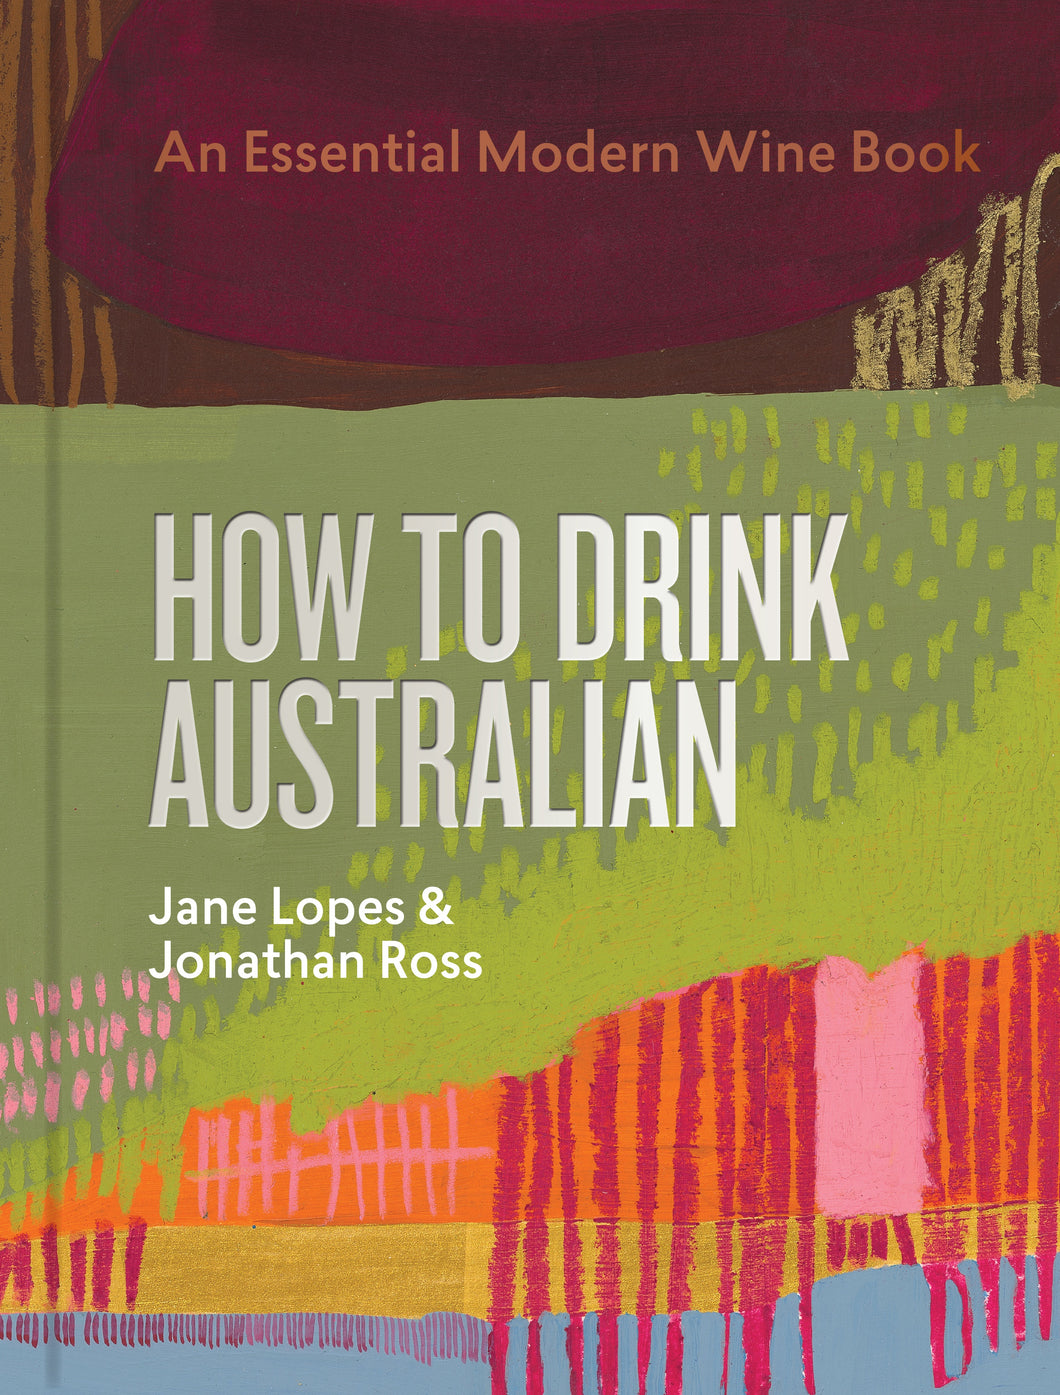 How to Drink Australian by Jane Lopes and Jonathan Ross